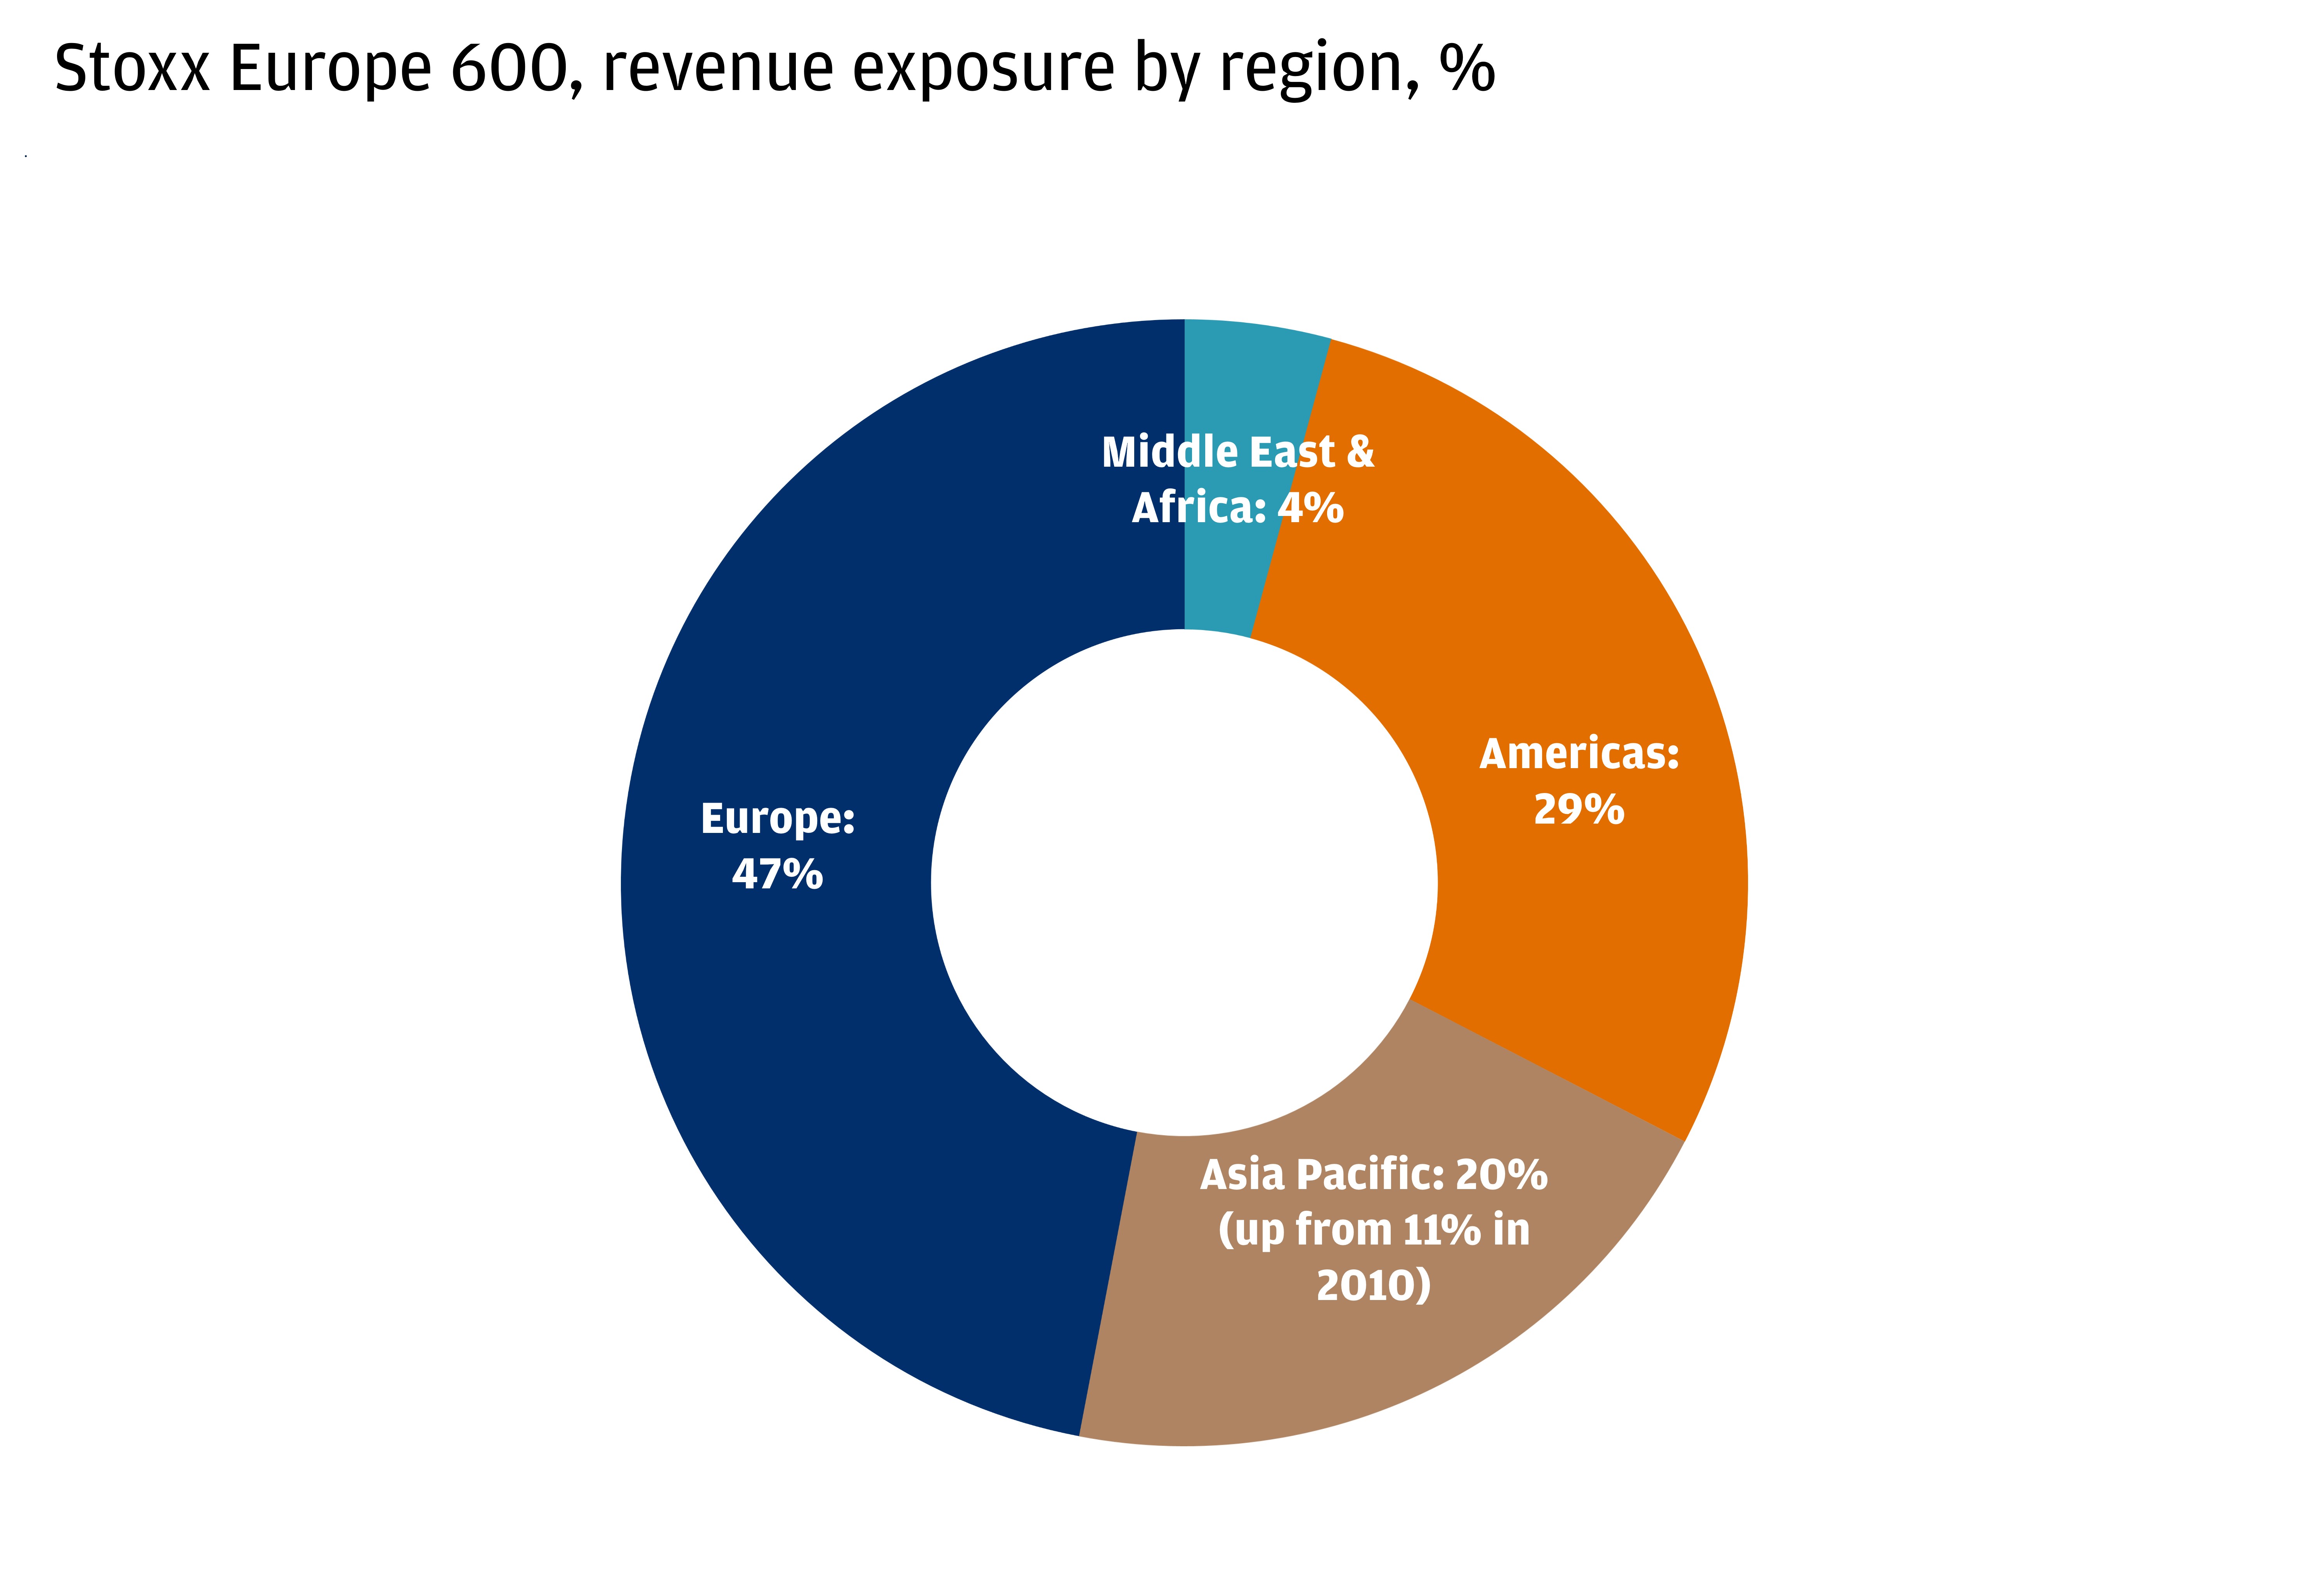 This chart shows the revenue exposure by region for the Stoxx Europe 600.